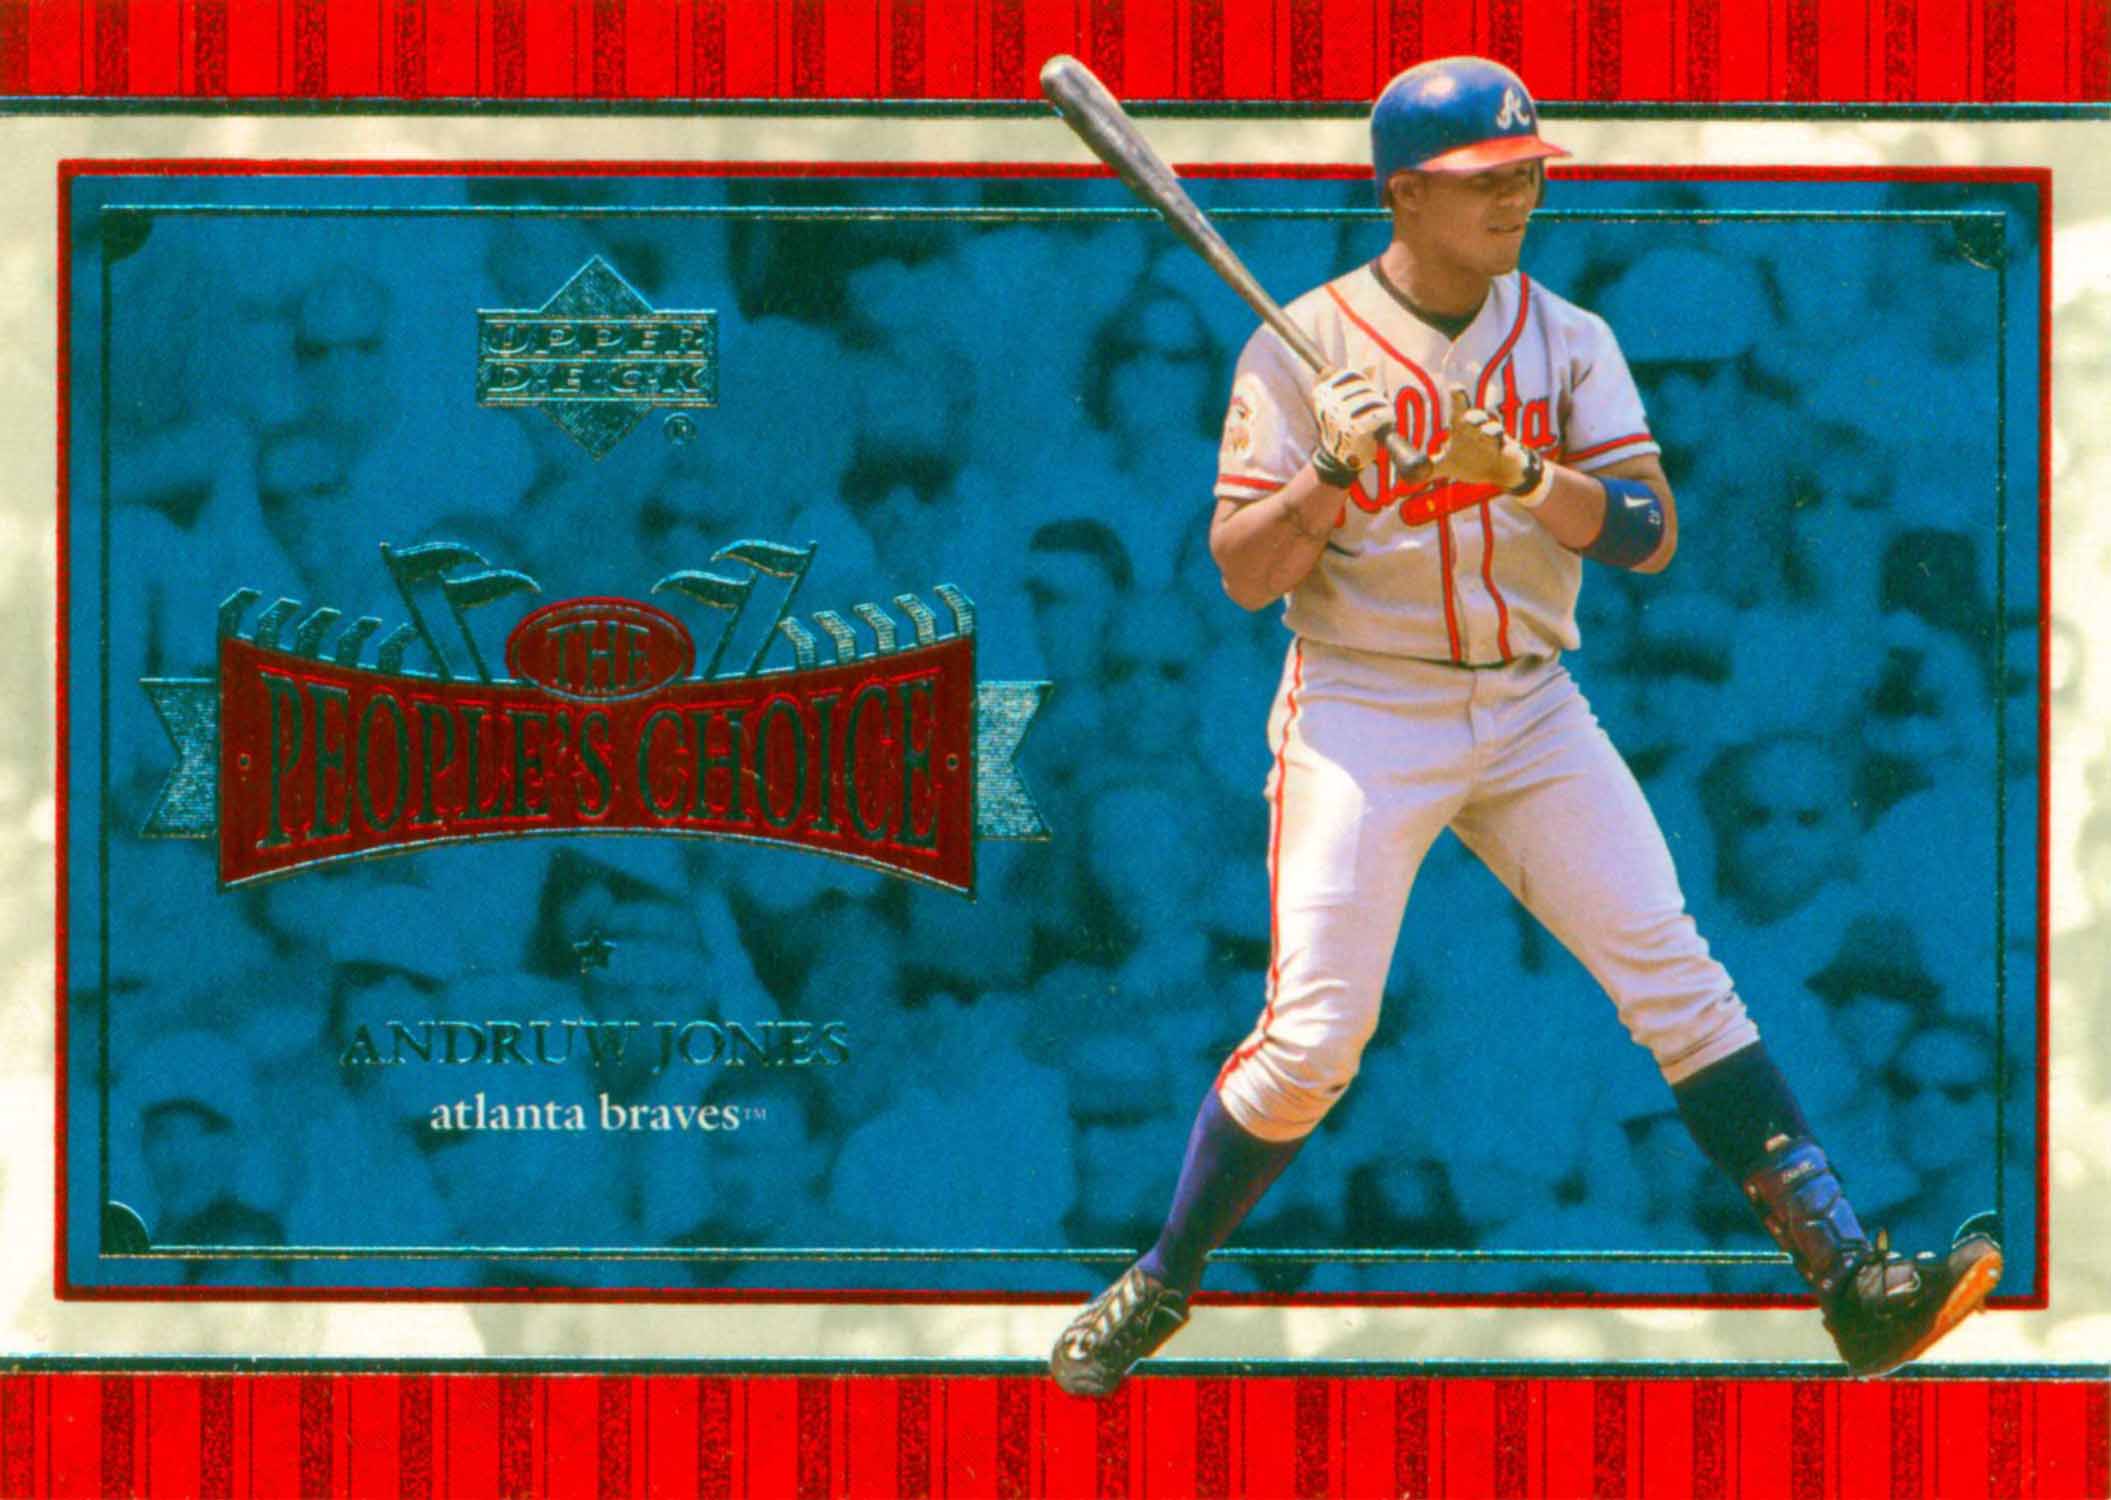 2001 Upper Deck People's Choice